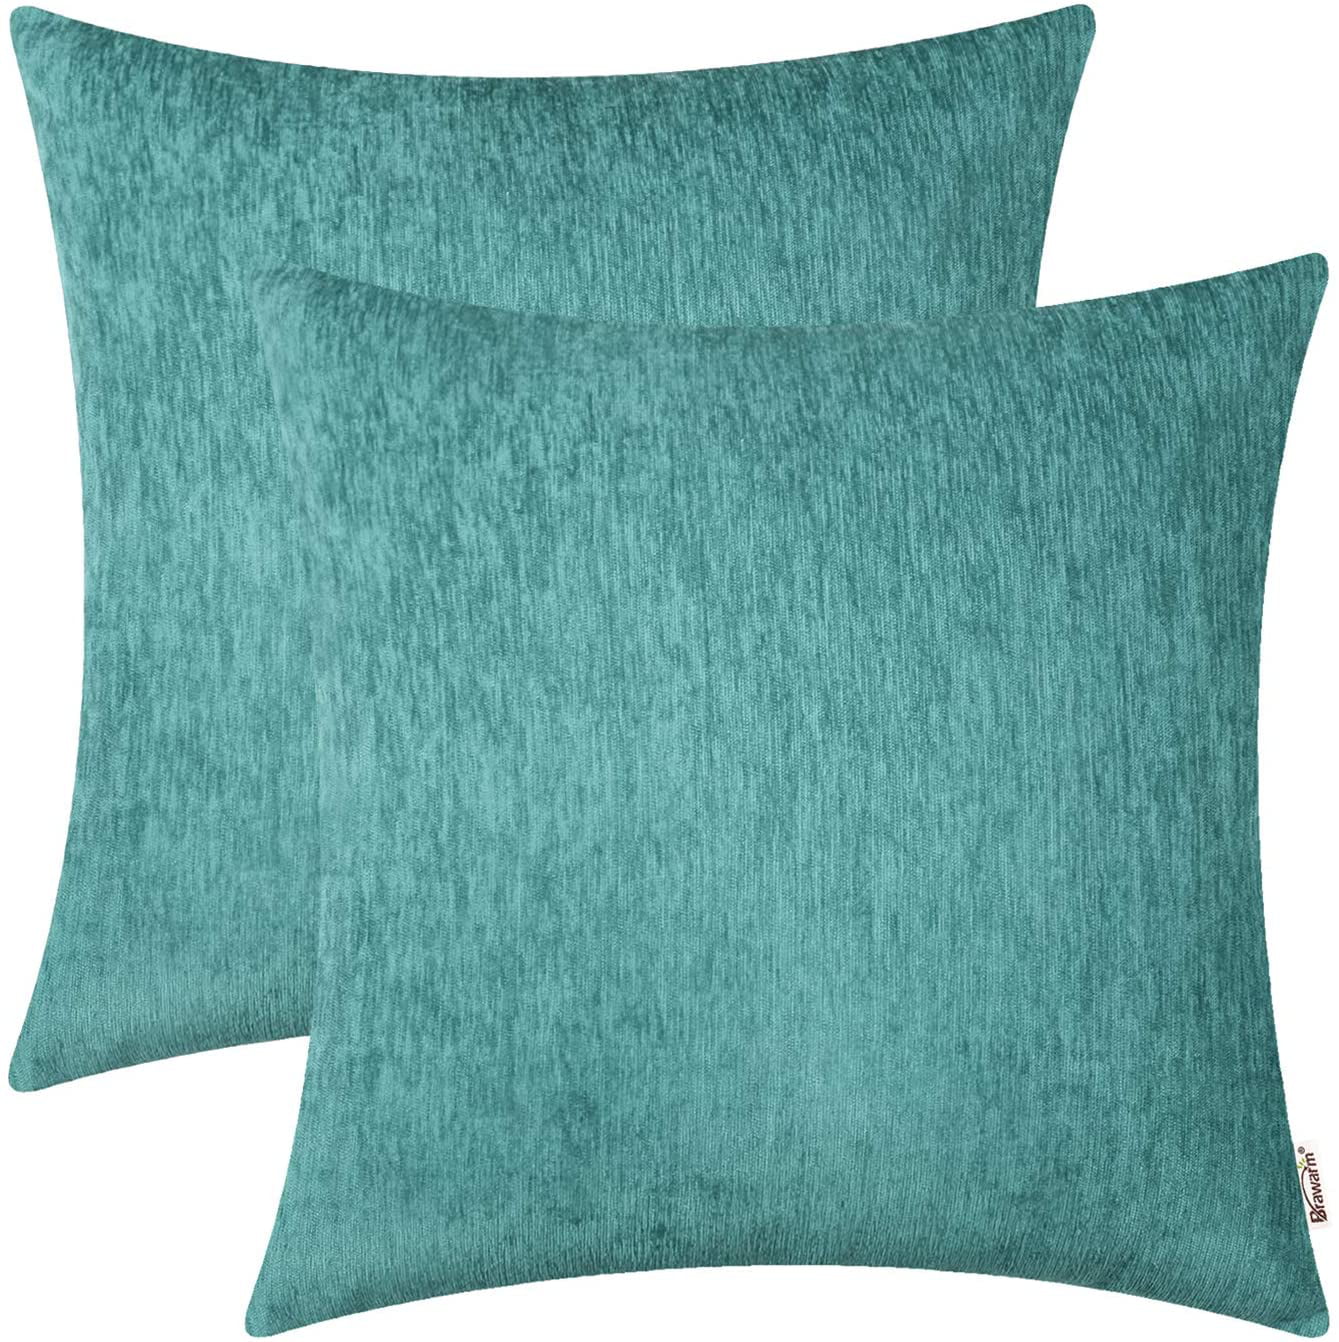 Rythome Set of 2 Comfortable Throw Pillow Cover for Bedding Decorative Accent Cushion Sham Case for Couch Sofa 16x16 Apple Green Soft Solid Velvet with Zipper Hidden 